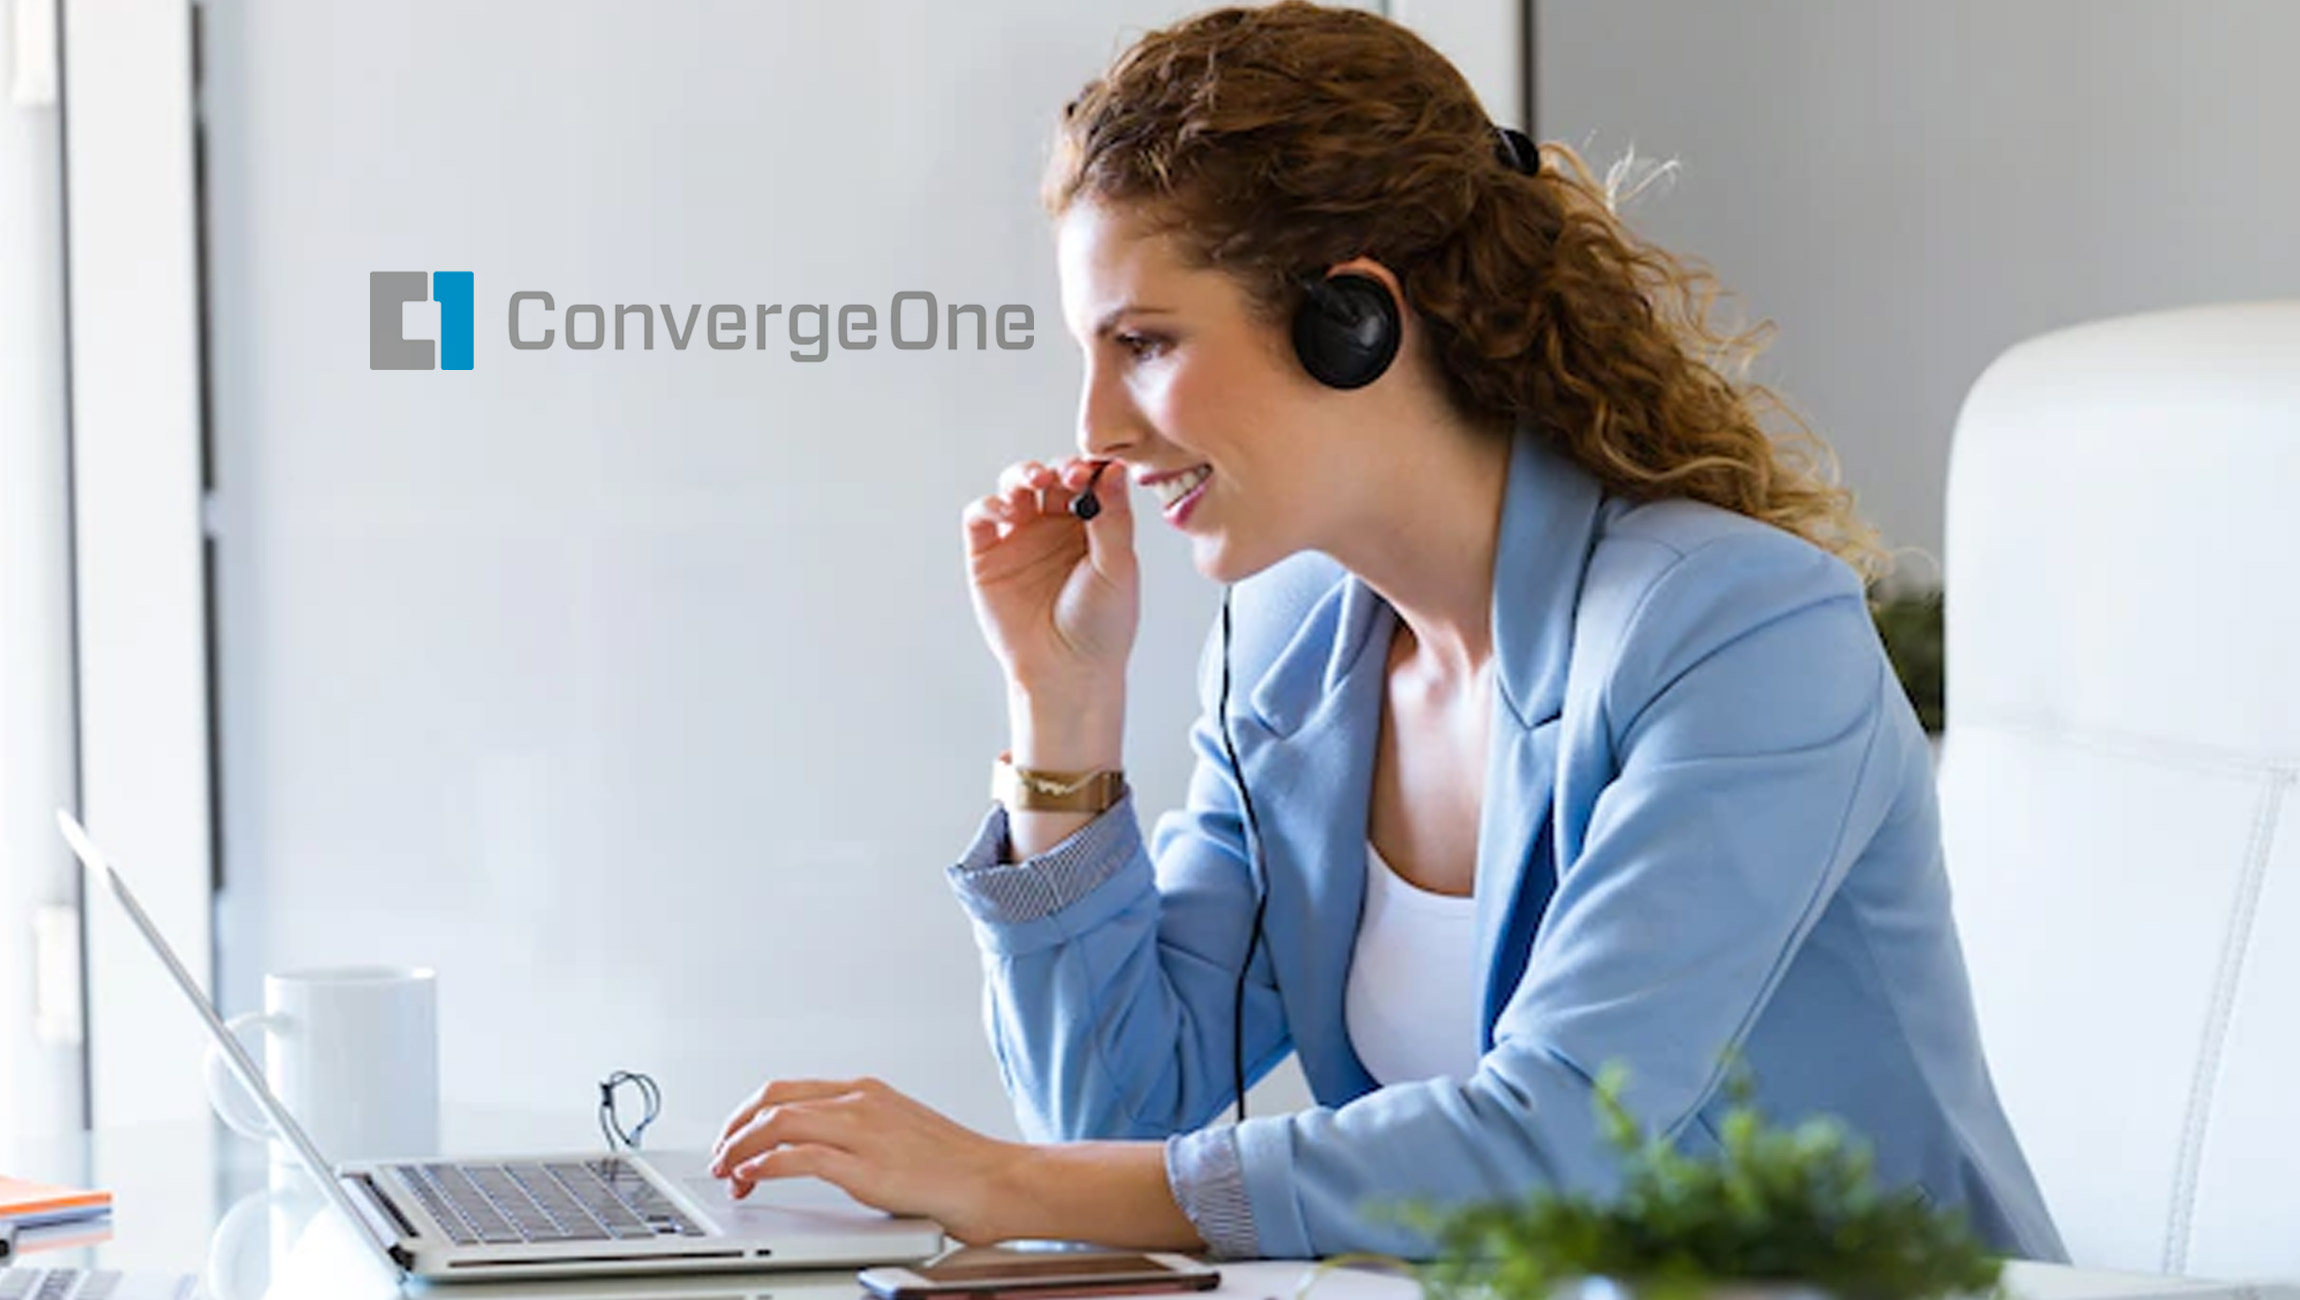 ConvergeOne Named a Georgia Technology Authority (GTA) Direct Approved Vendor for Hosted Contact Center Services